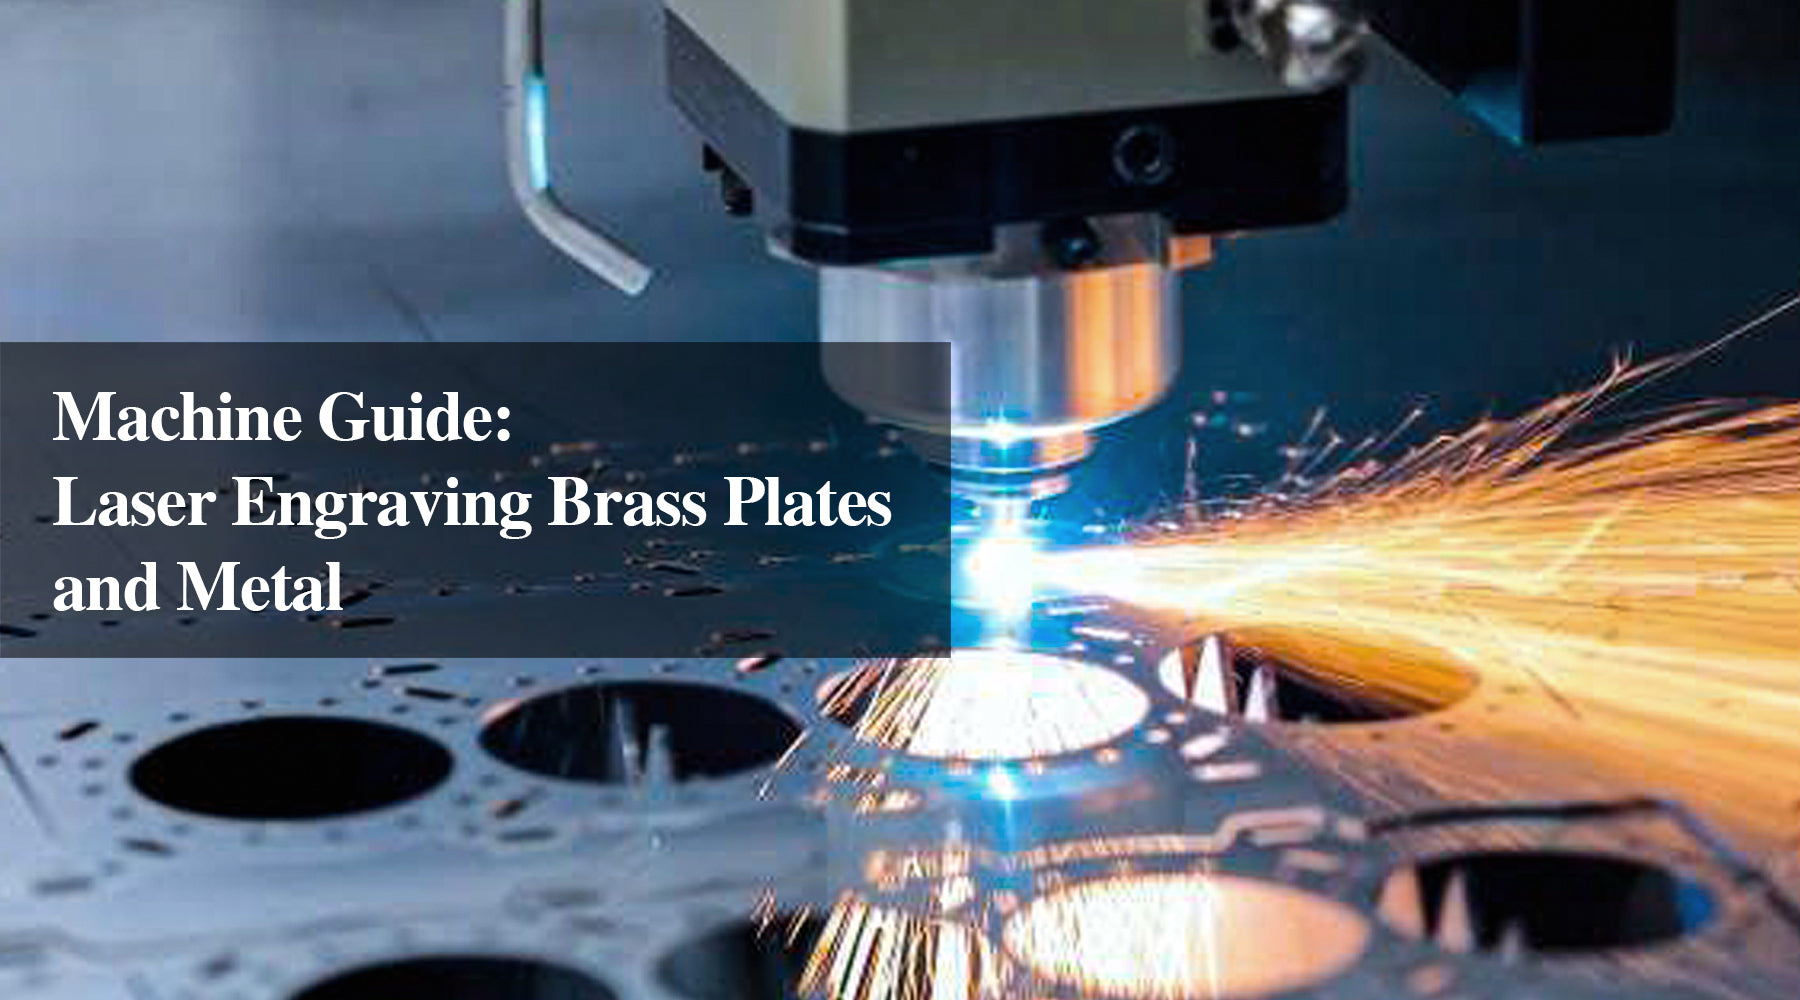 Machine Guide: Laser Engraving Brass Plates and Metal